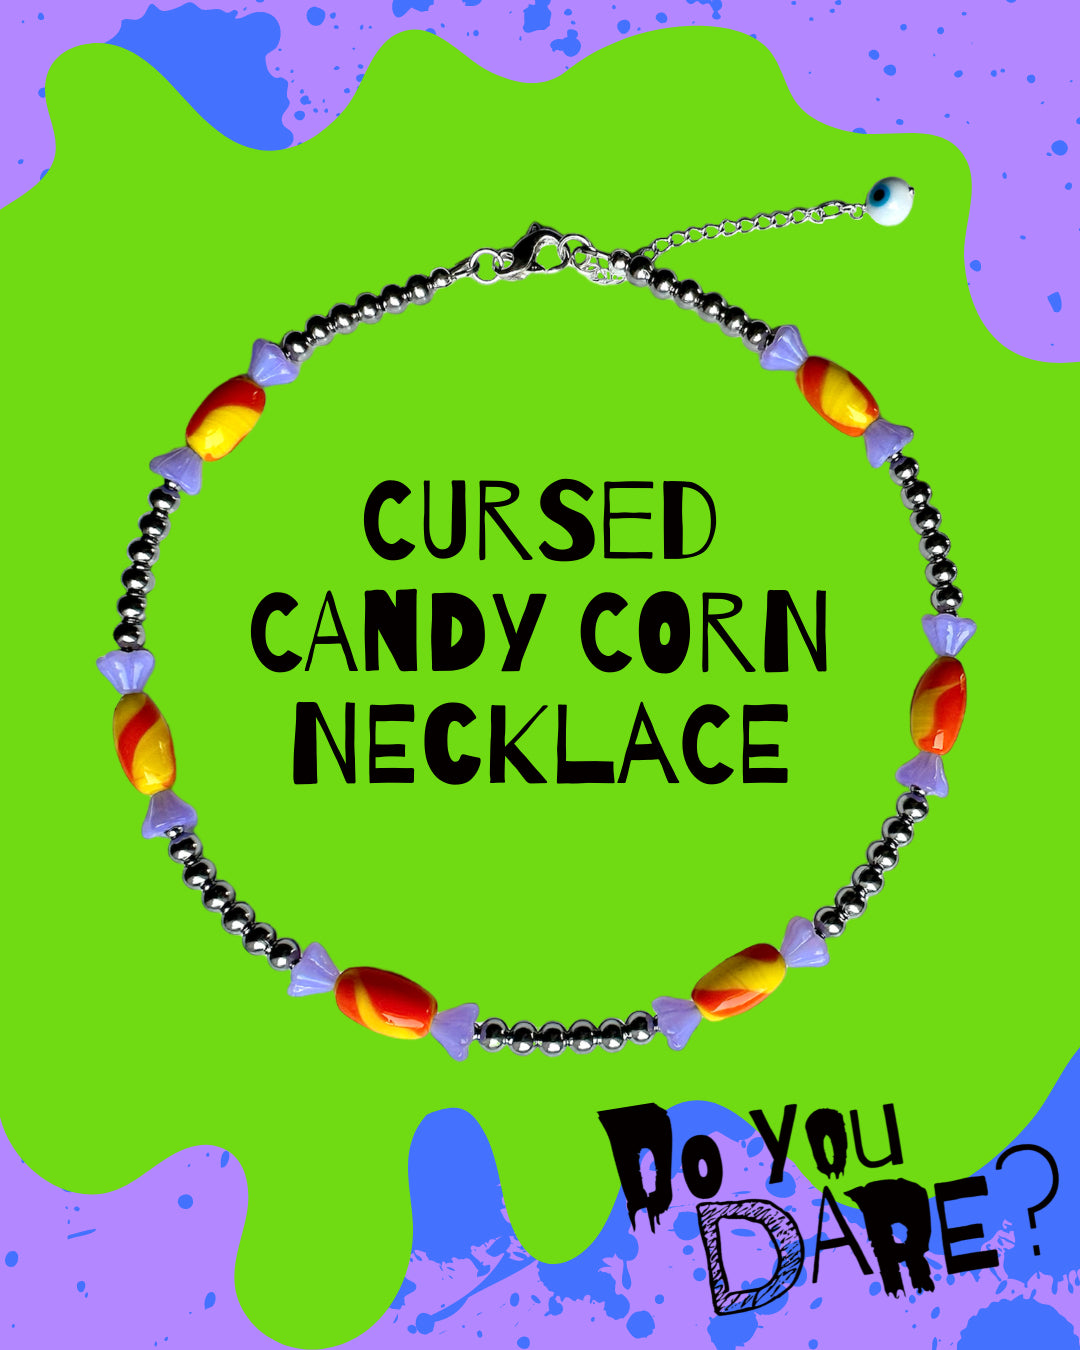 Gooselumps: 💀🍬🌽 CURSED CANDY CORN NECKLACE 🌽🍬💀